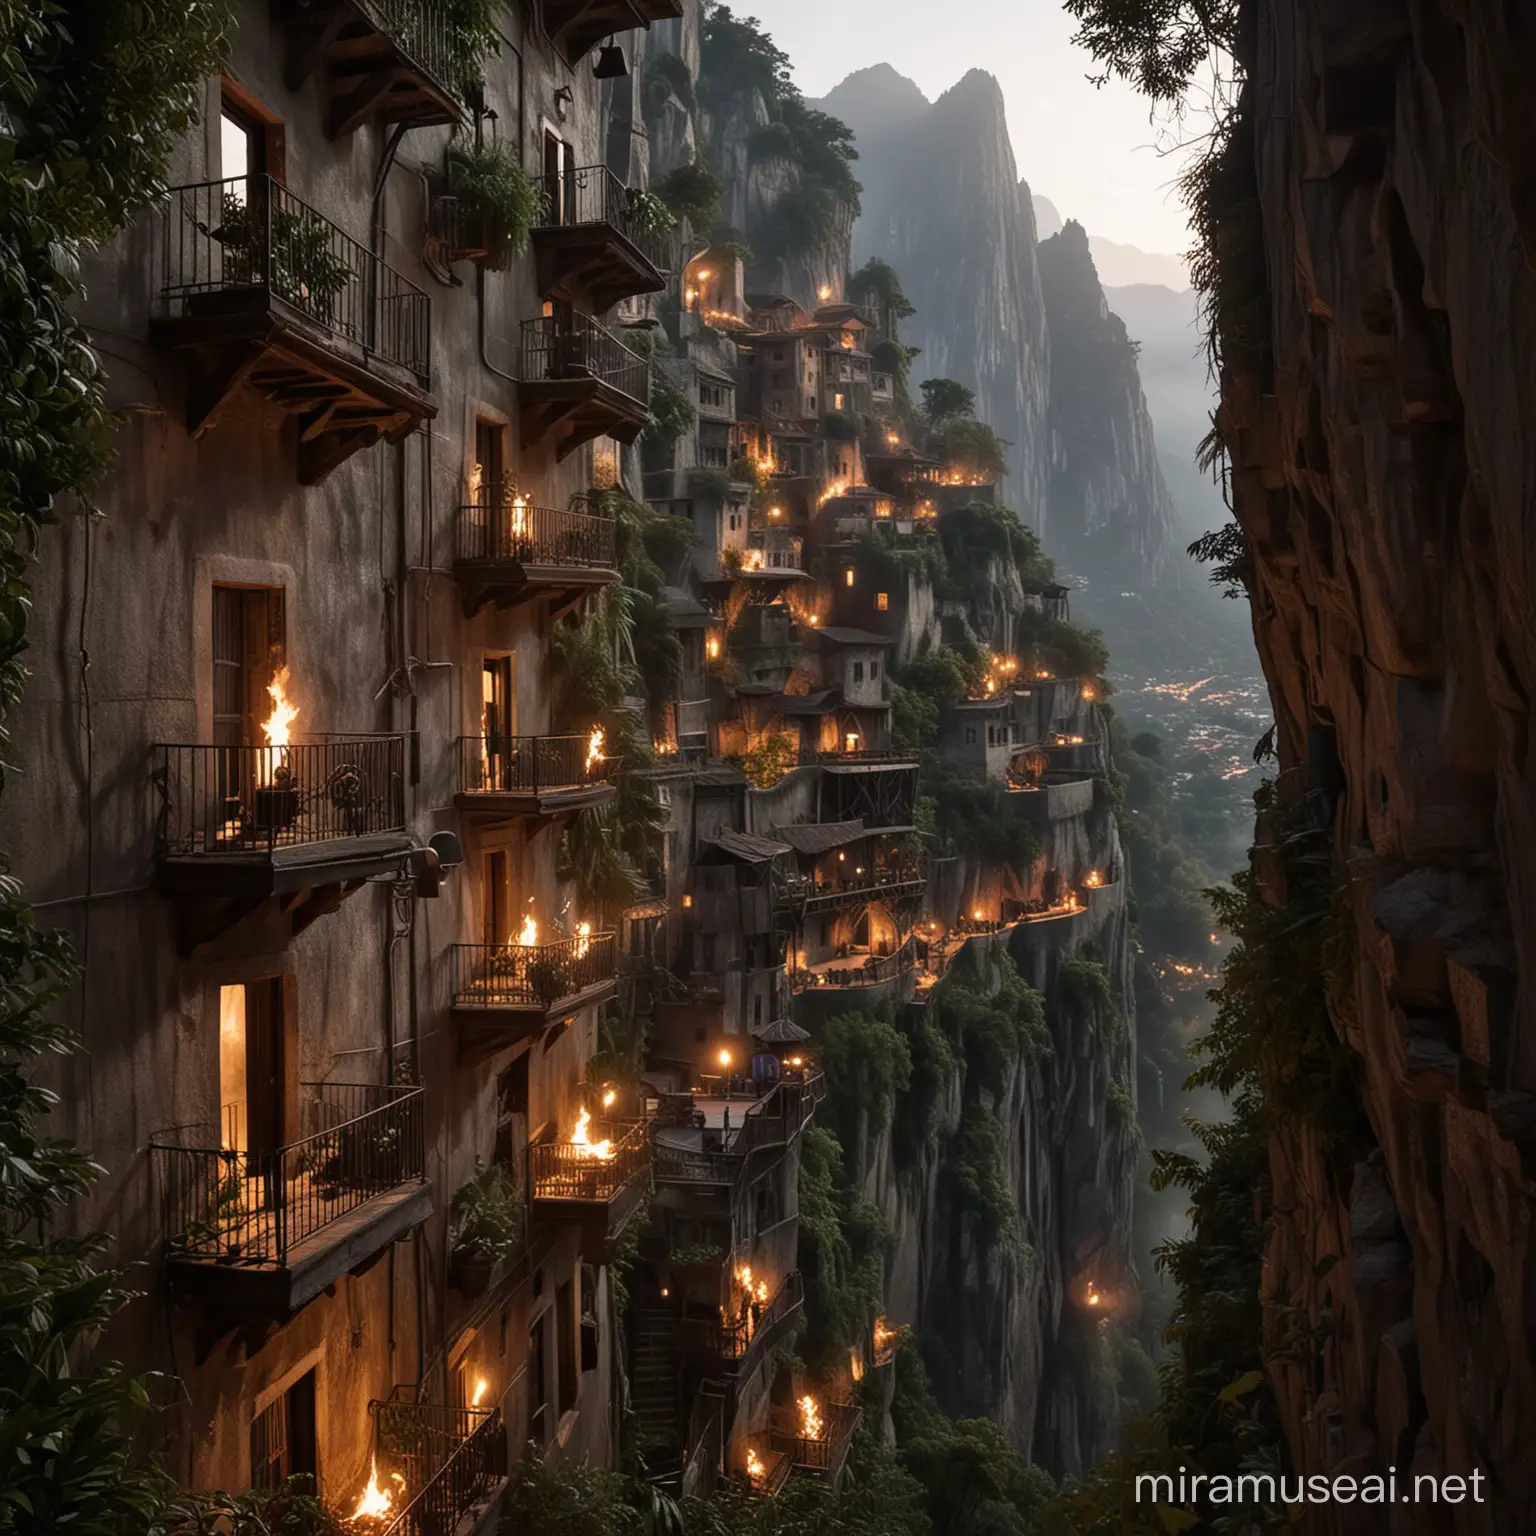 Six stories built into the spire features a number of balconies and torches burning at all hours that give off a warm, welcoming glow. in a jungle town up on a mountain.